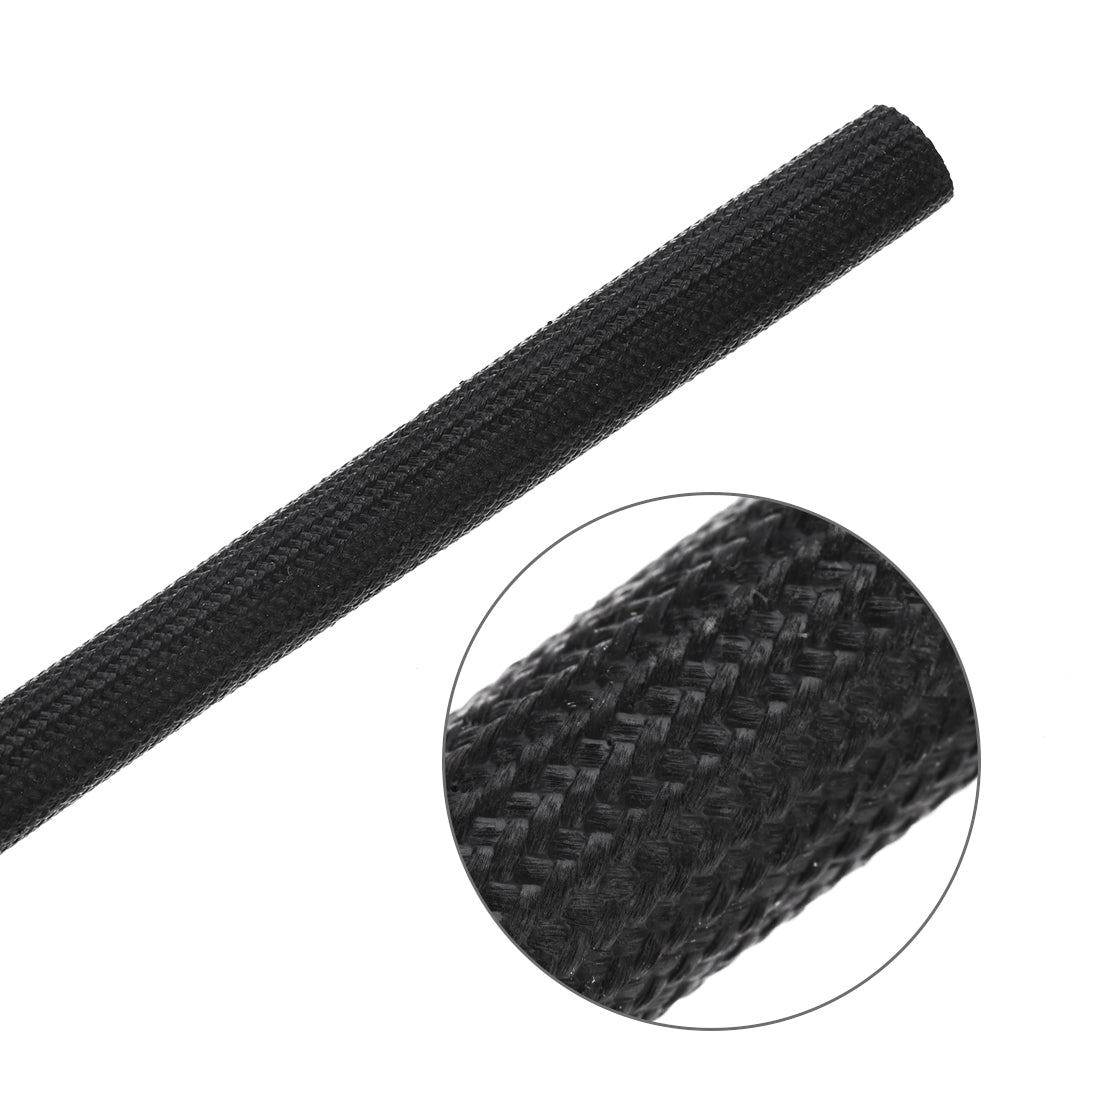 uxcell Uxcell Insulation Cable Protector, 33Ft-10mm High TEMP Silicone Fiberglass Sleeve Black